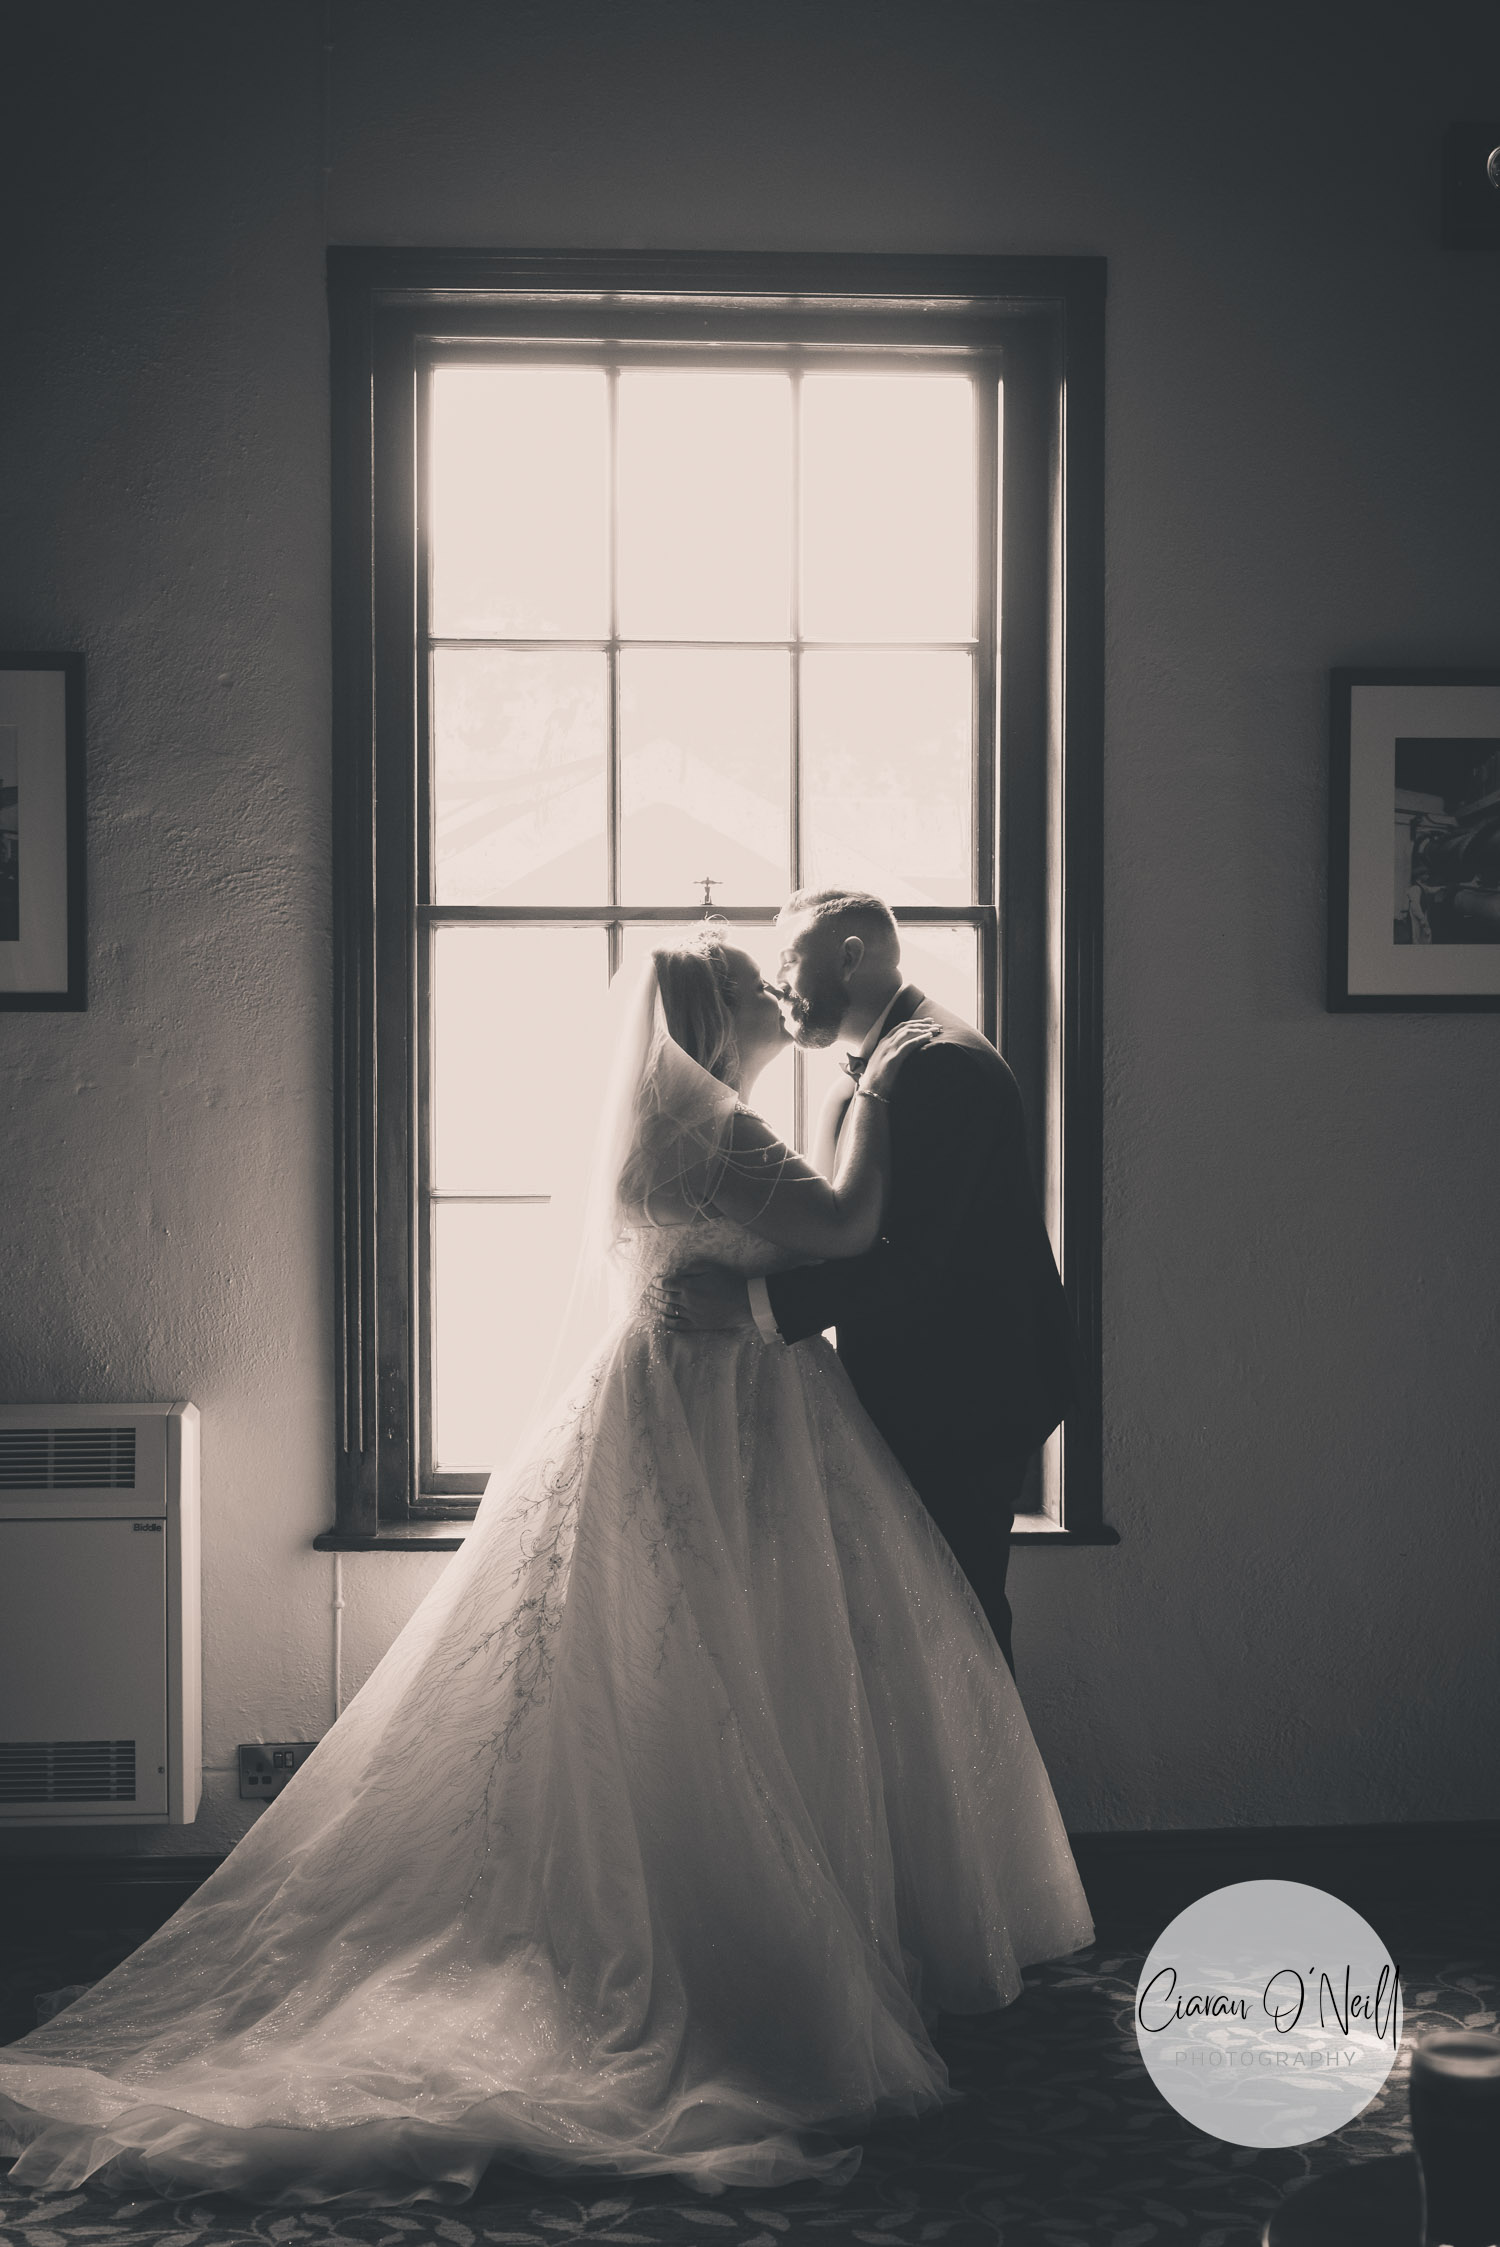 Bride & groom kissing in front of a window